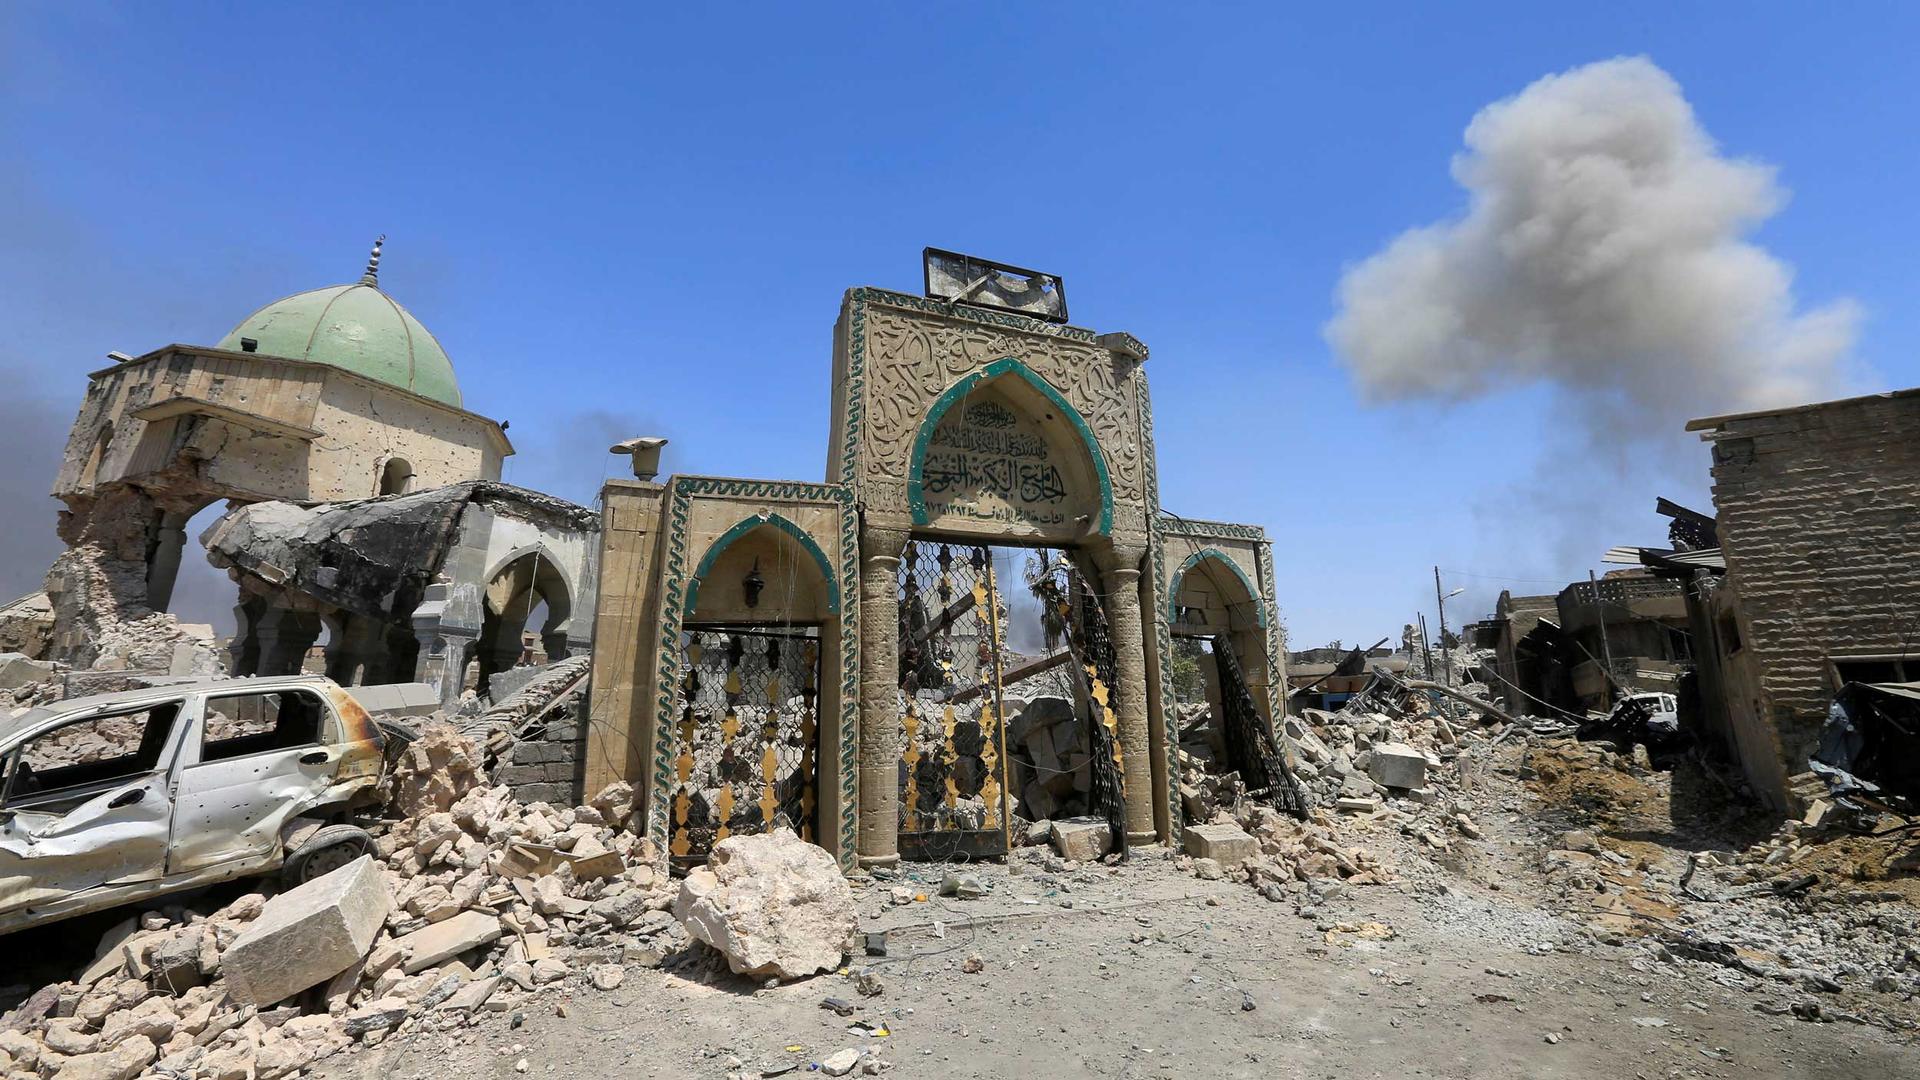 The front of mosque is seen amid rubble. Behind the door, is a distinctive blue dome.